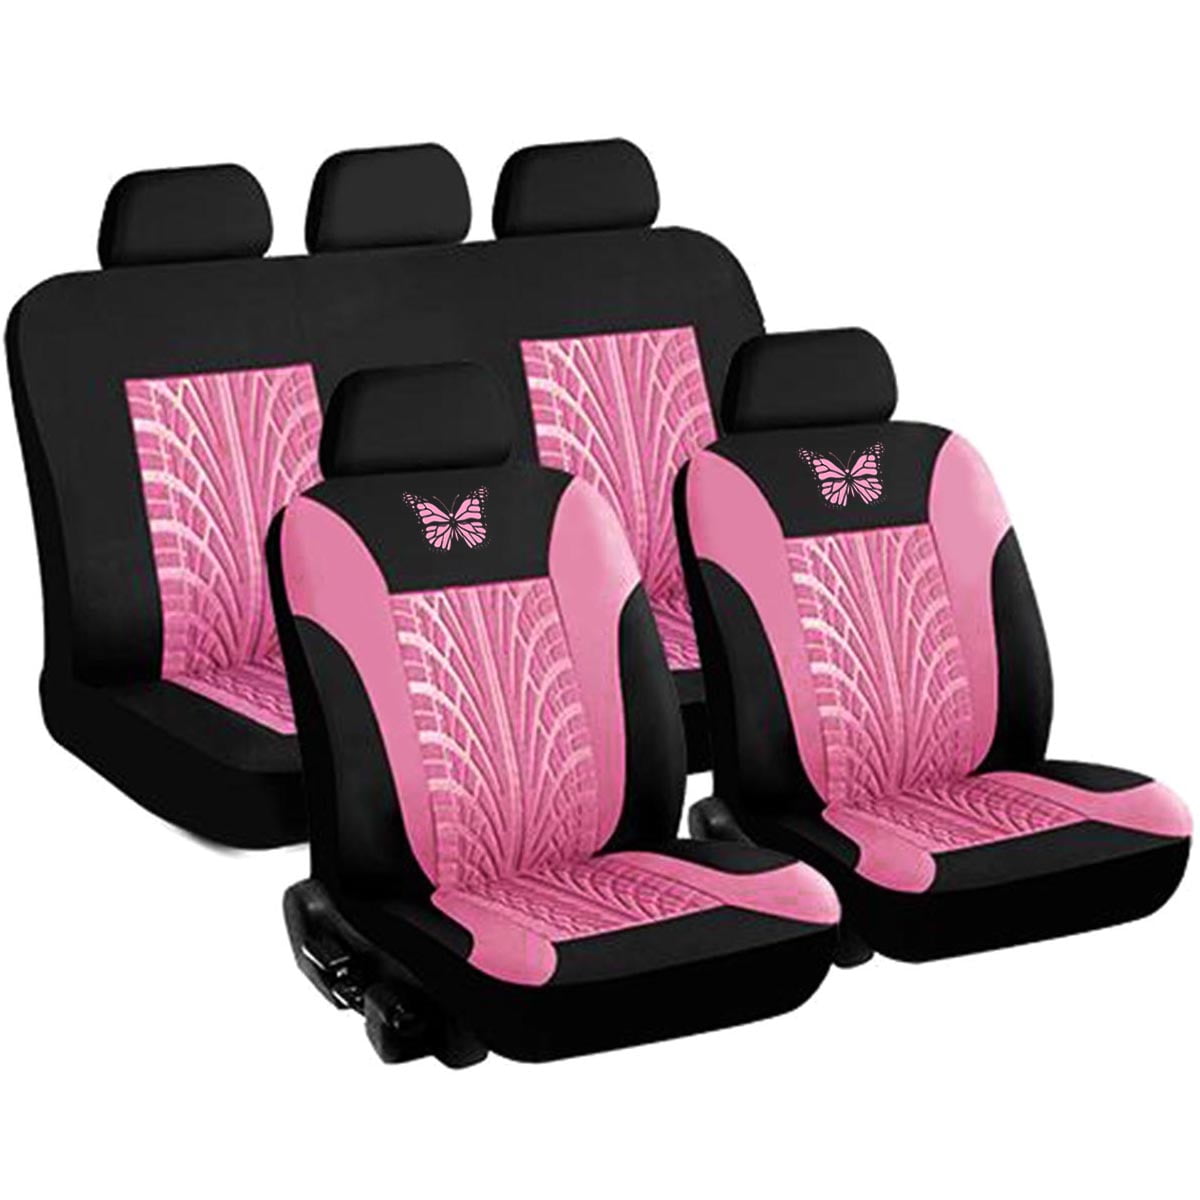 Universal SUV Car Seat Cover Full Set Protectors Durable 5-Seat Cushion+Headrest